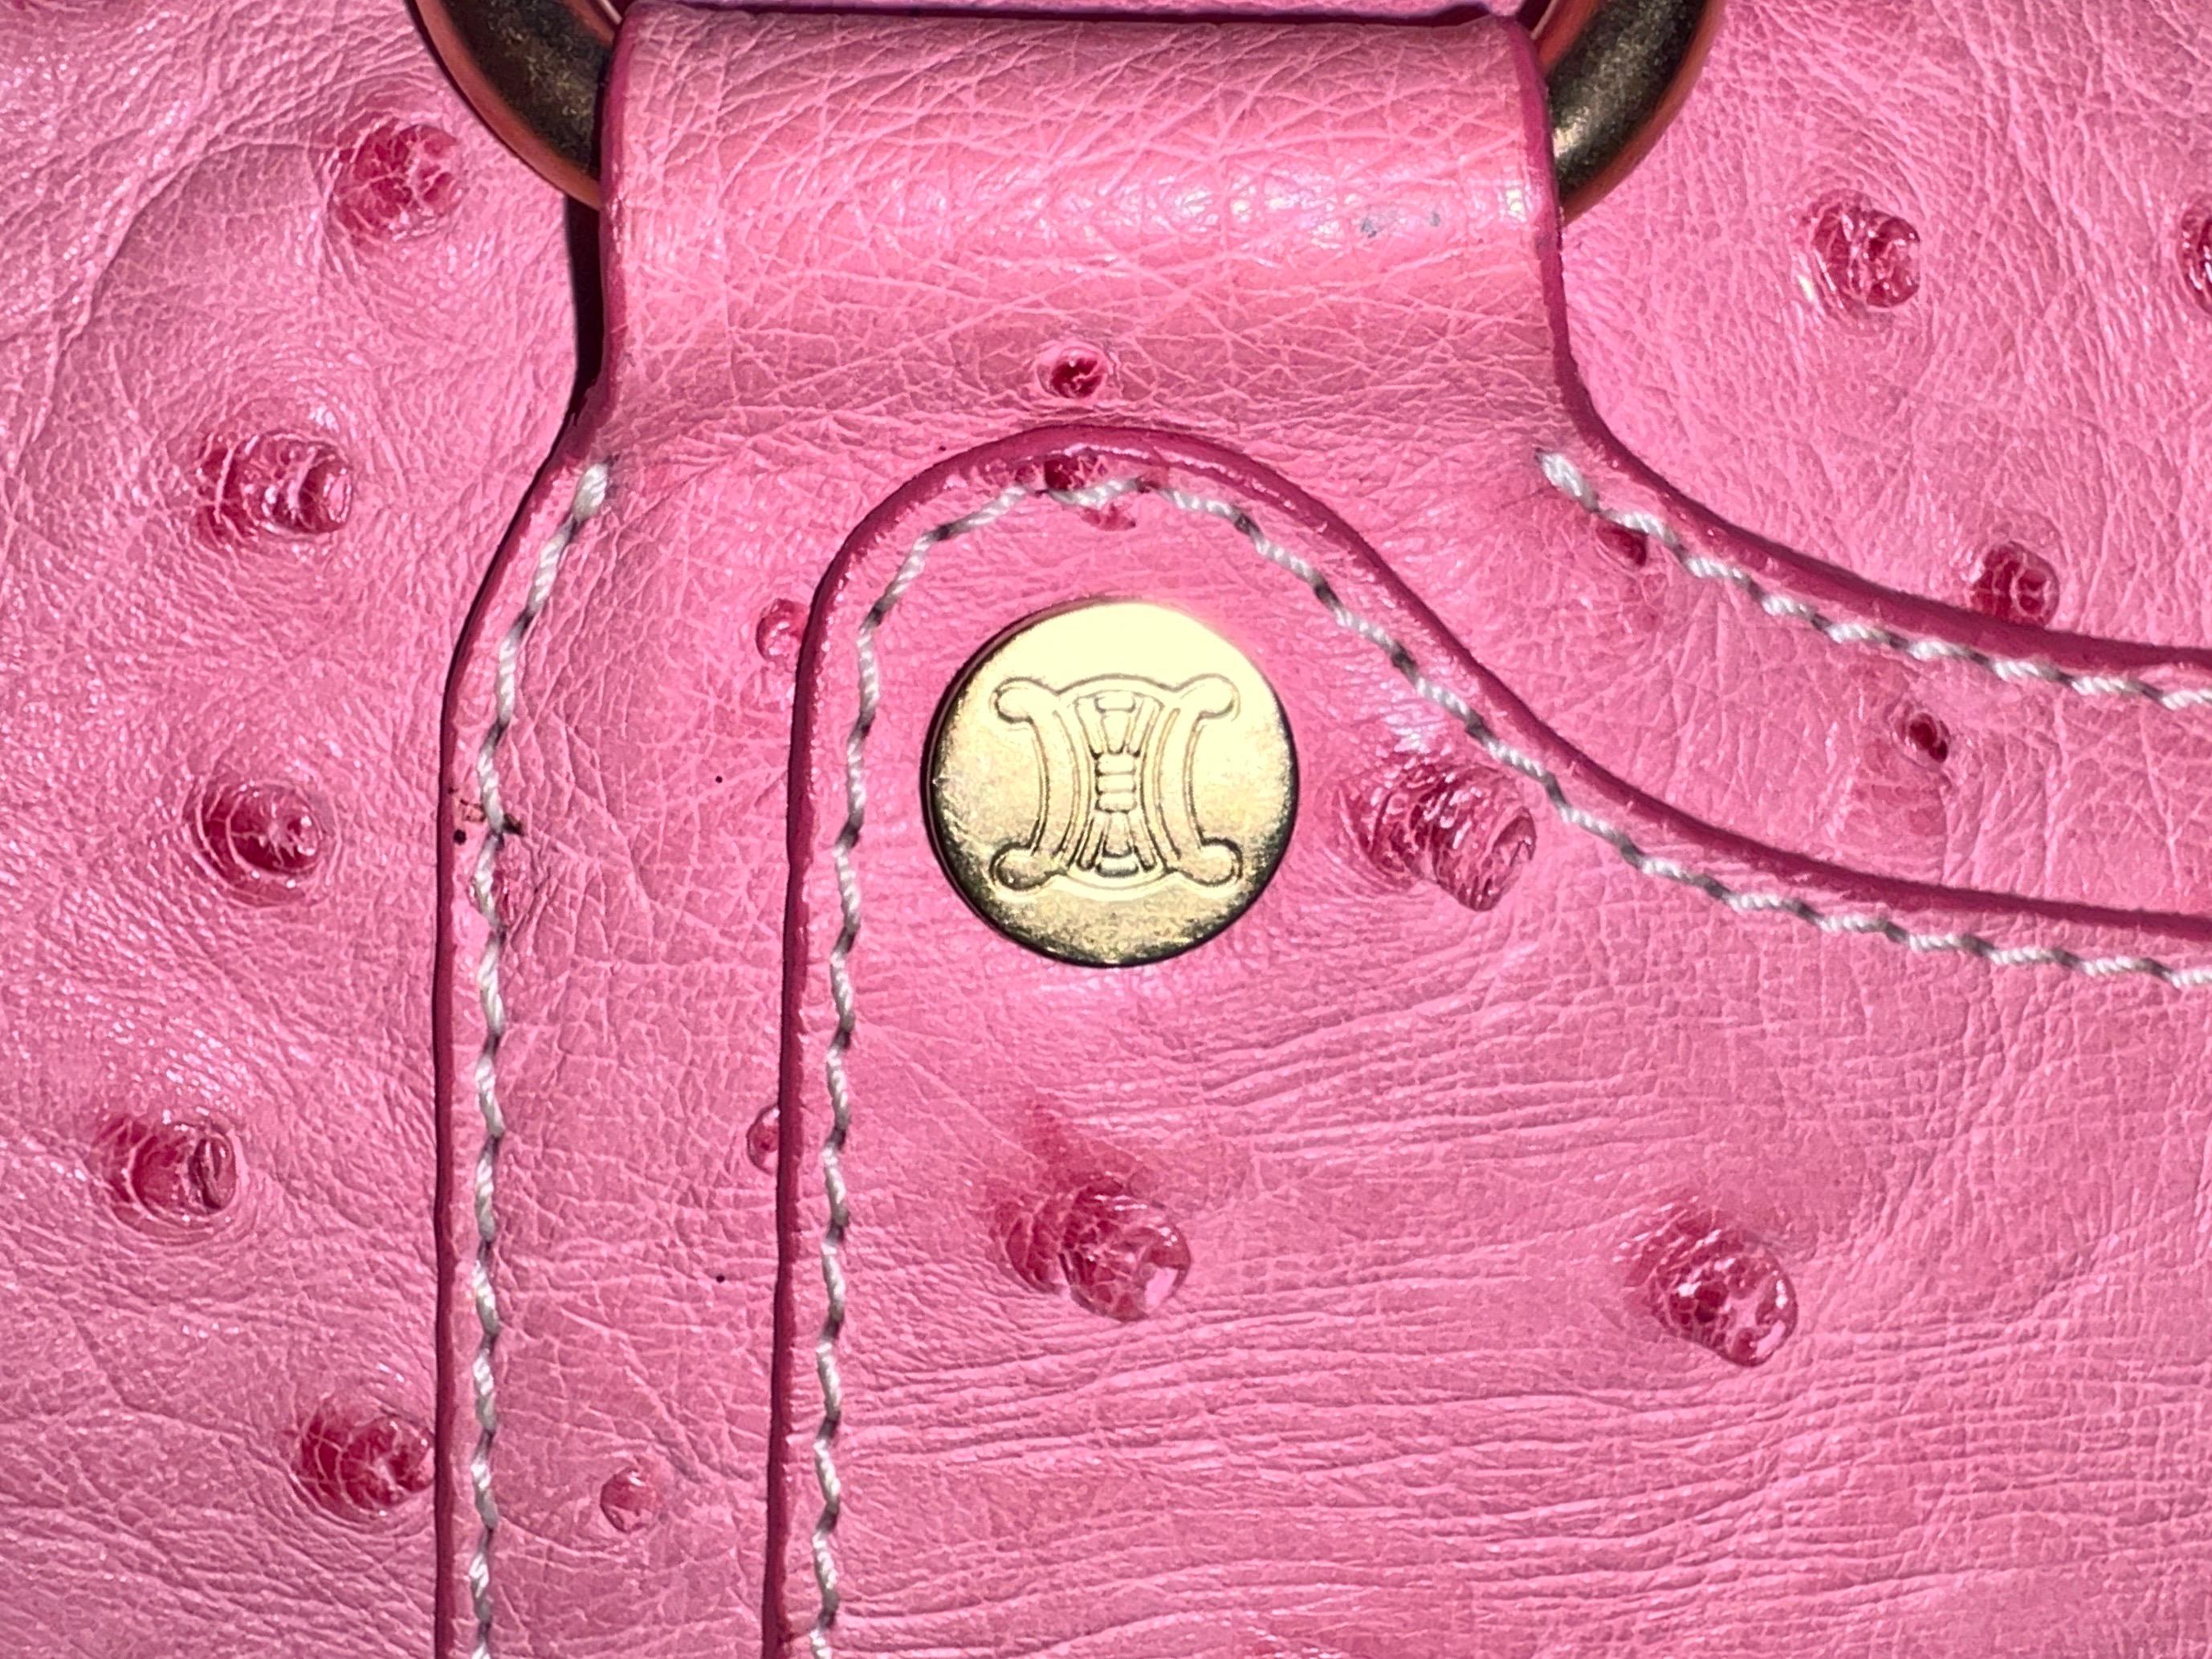 CELINE Rare Exotic Pink „Barbie“ Ostrich Skin Boogie Bag by Michael Kors 2000s For Sale 8